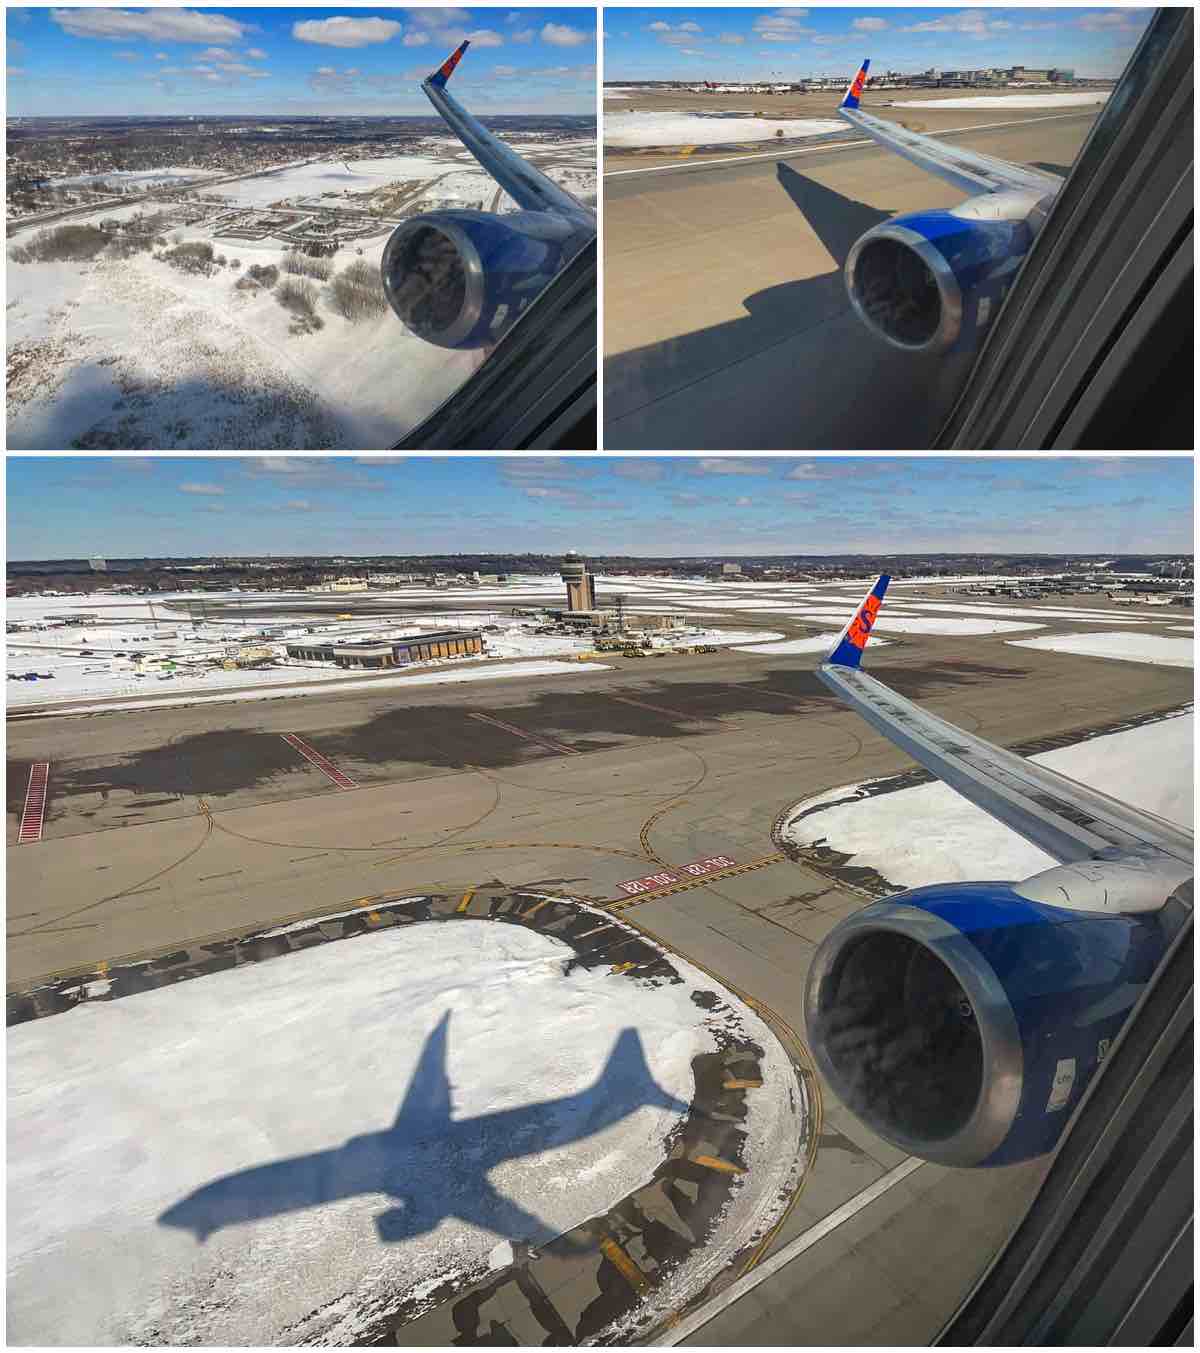 Sun country 737-800 departing MSP airport 